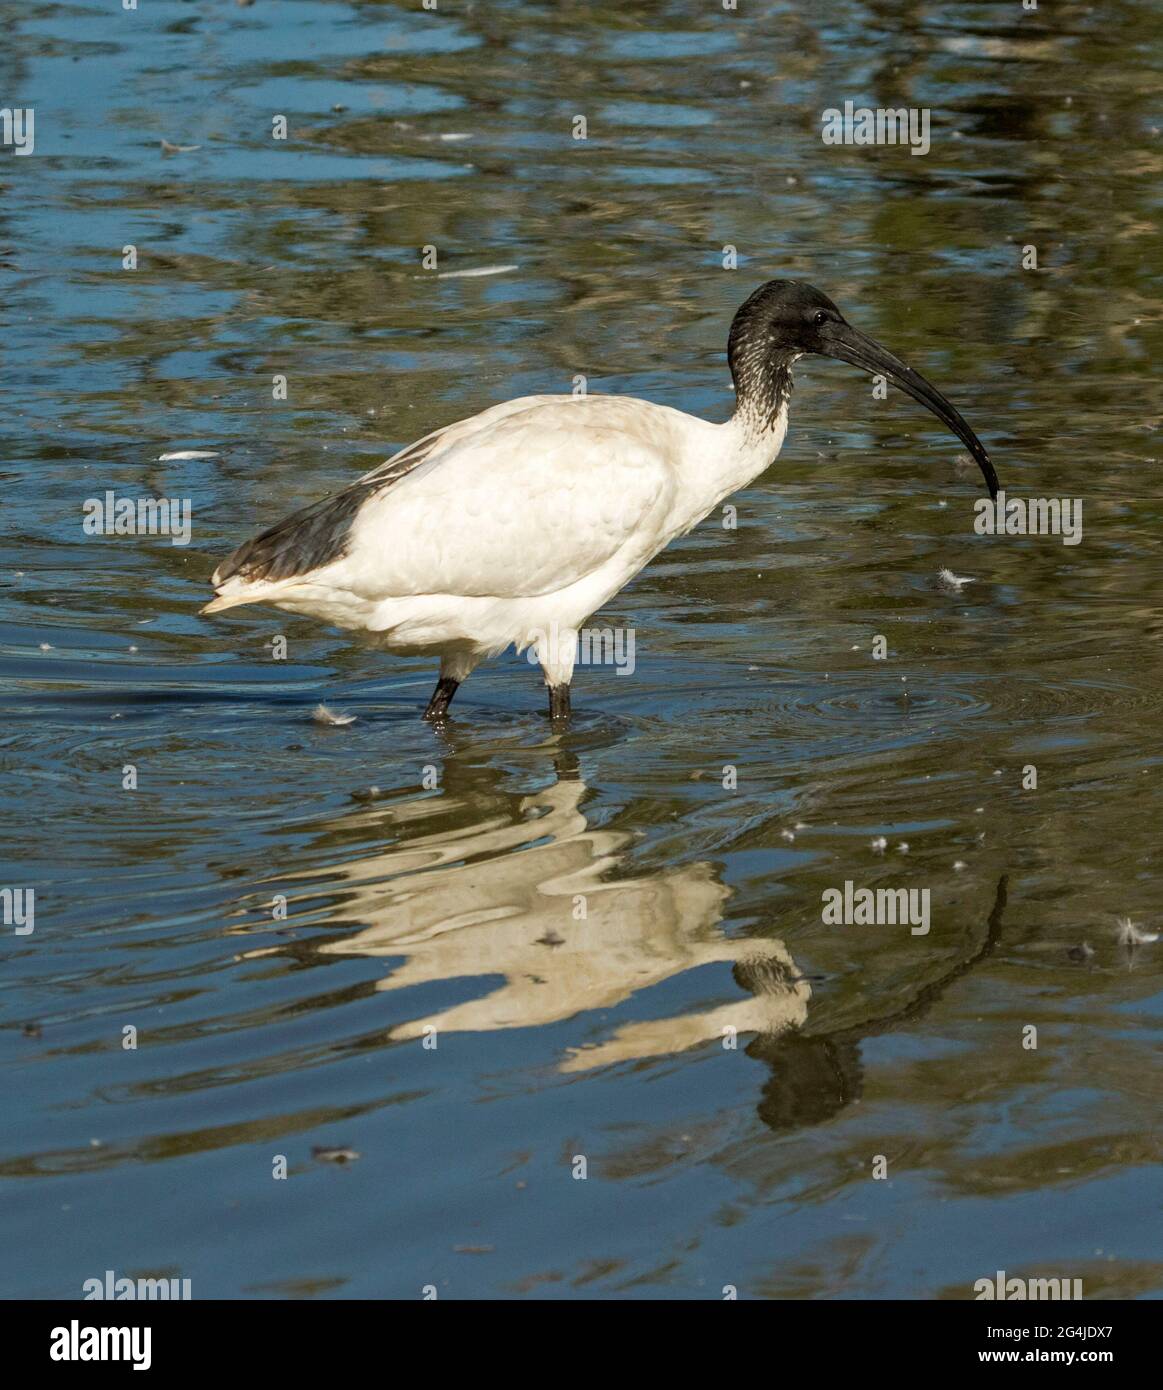 Sacred / White Ibis, Threskiornis molucca, wading and reflected in the blue water of a lake in a city park in Australia Stock Photo